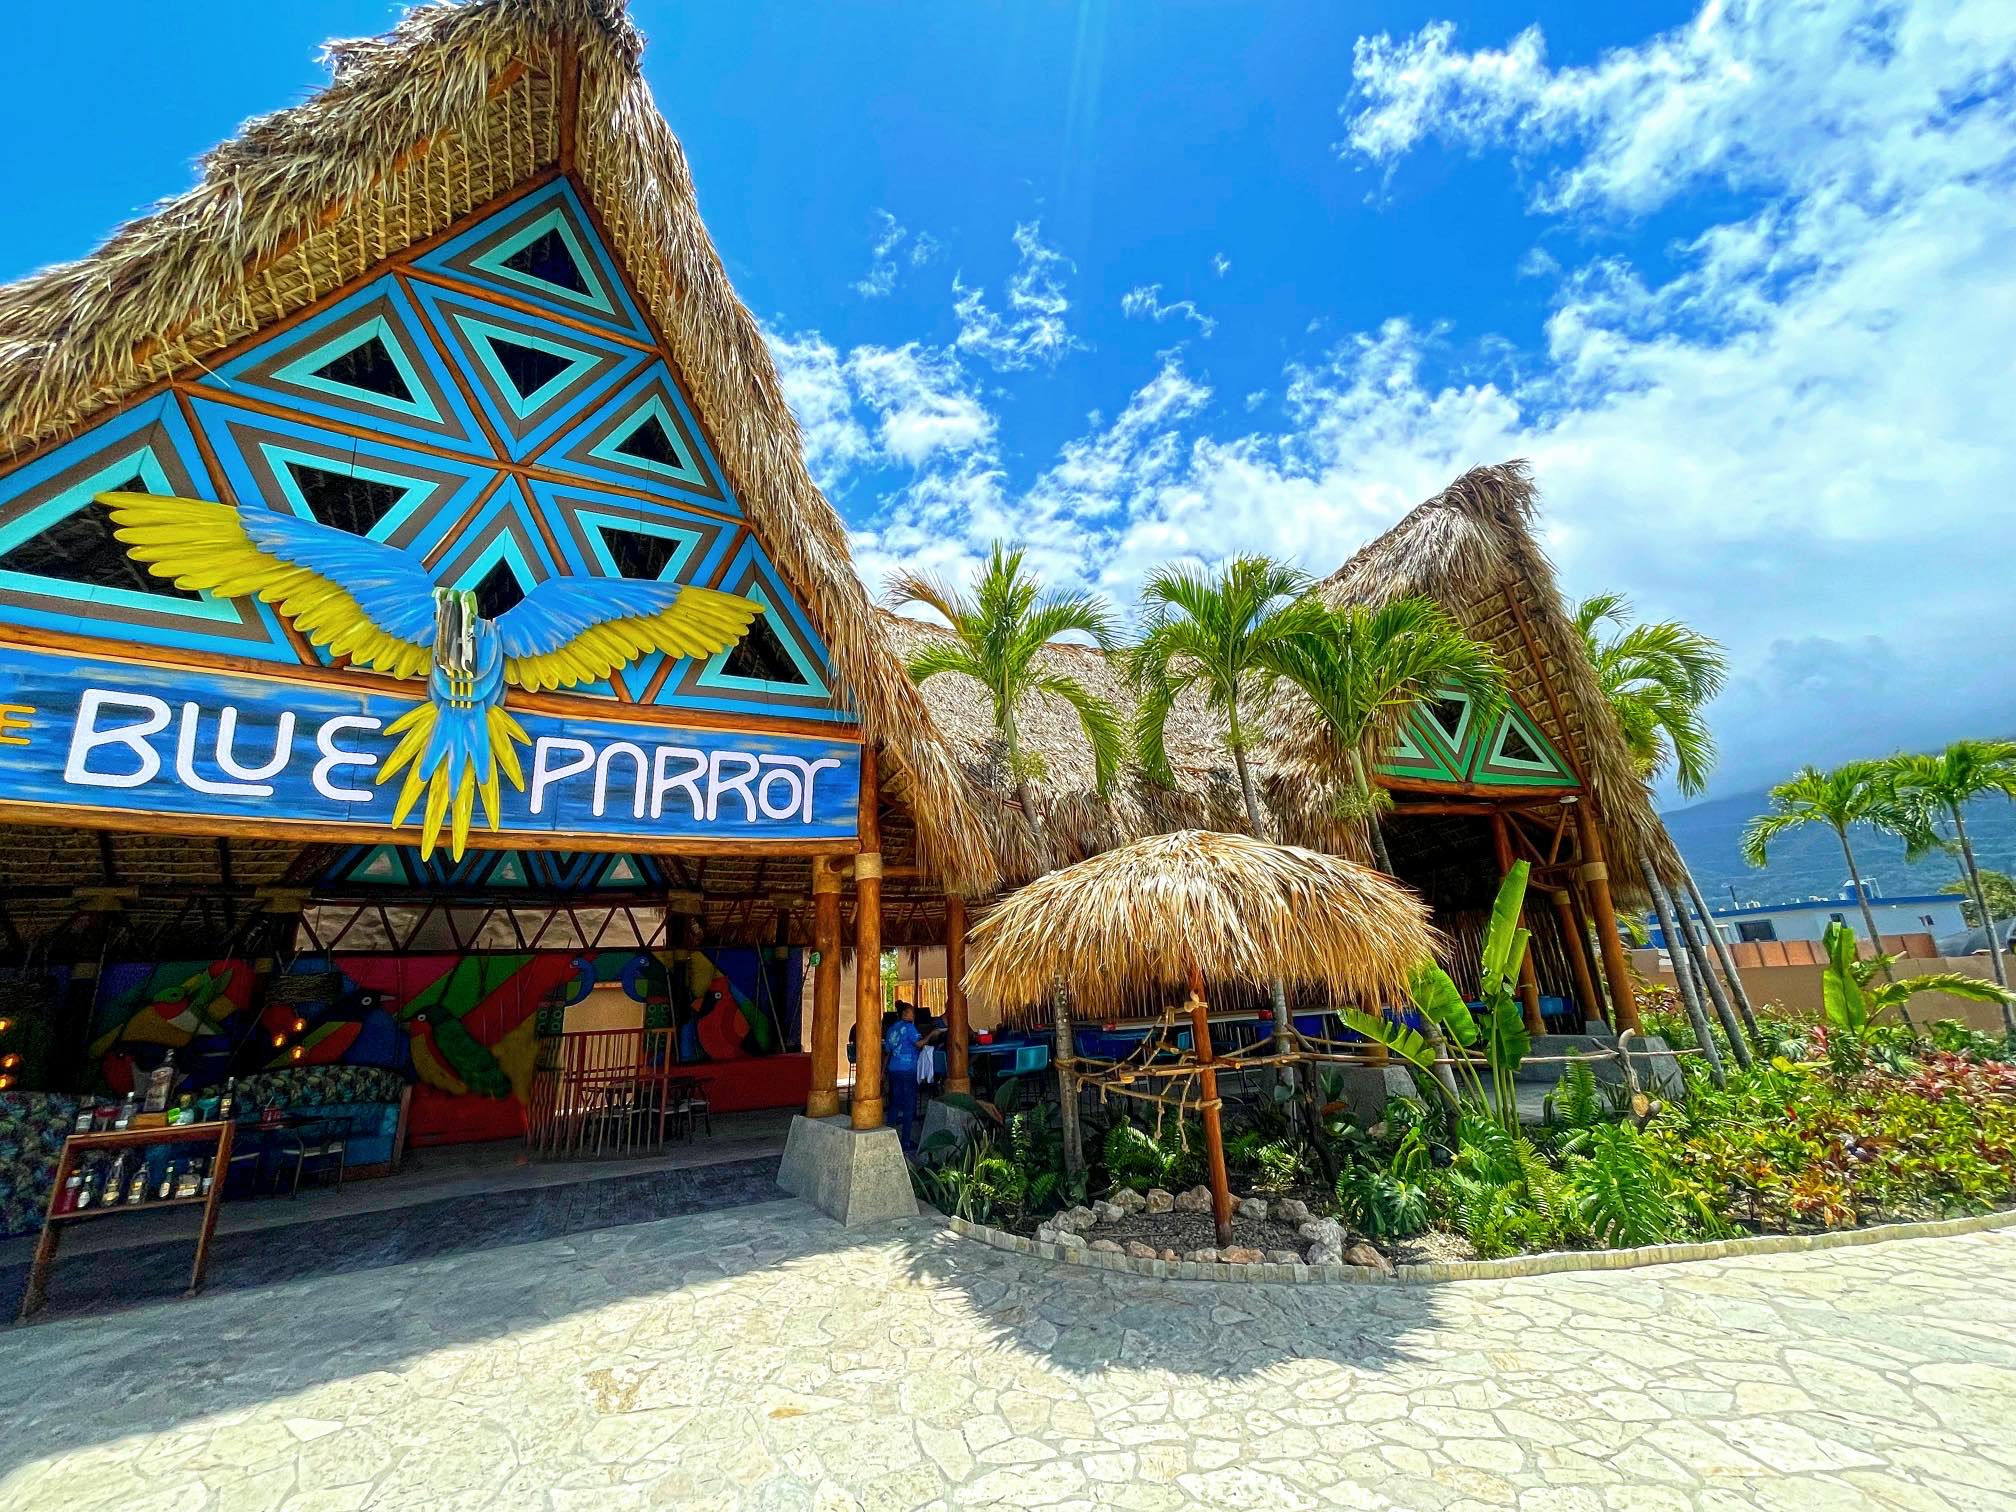 The Blue Parrot Bar at Taino Bay Port